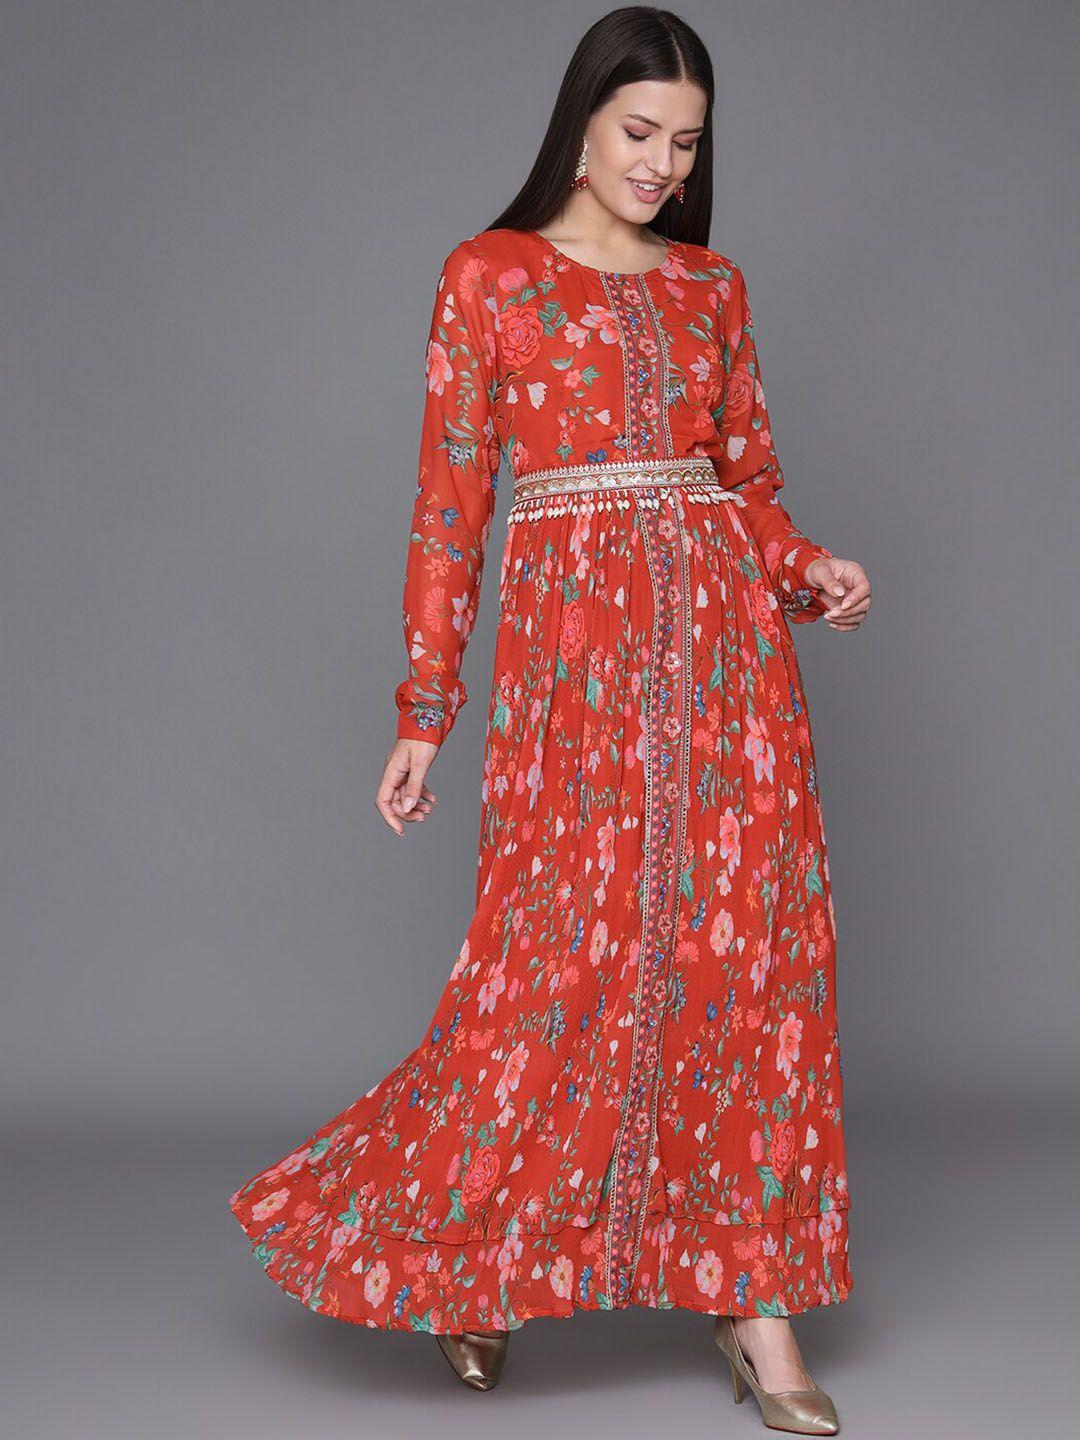 heeposh-floral-printed-georgette-fit-&-flare-ethnic-dress-with-organza-dupatta-and-belt